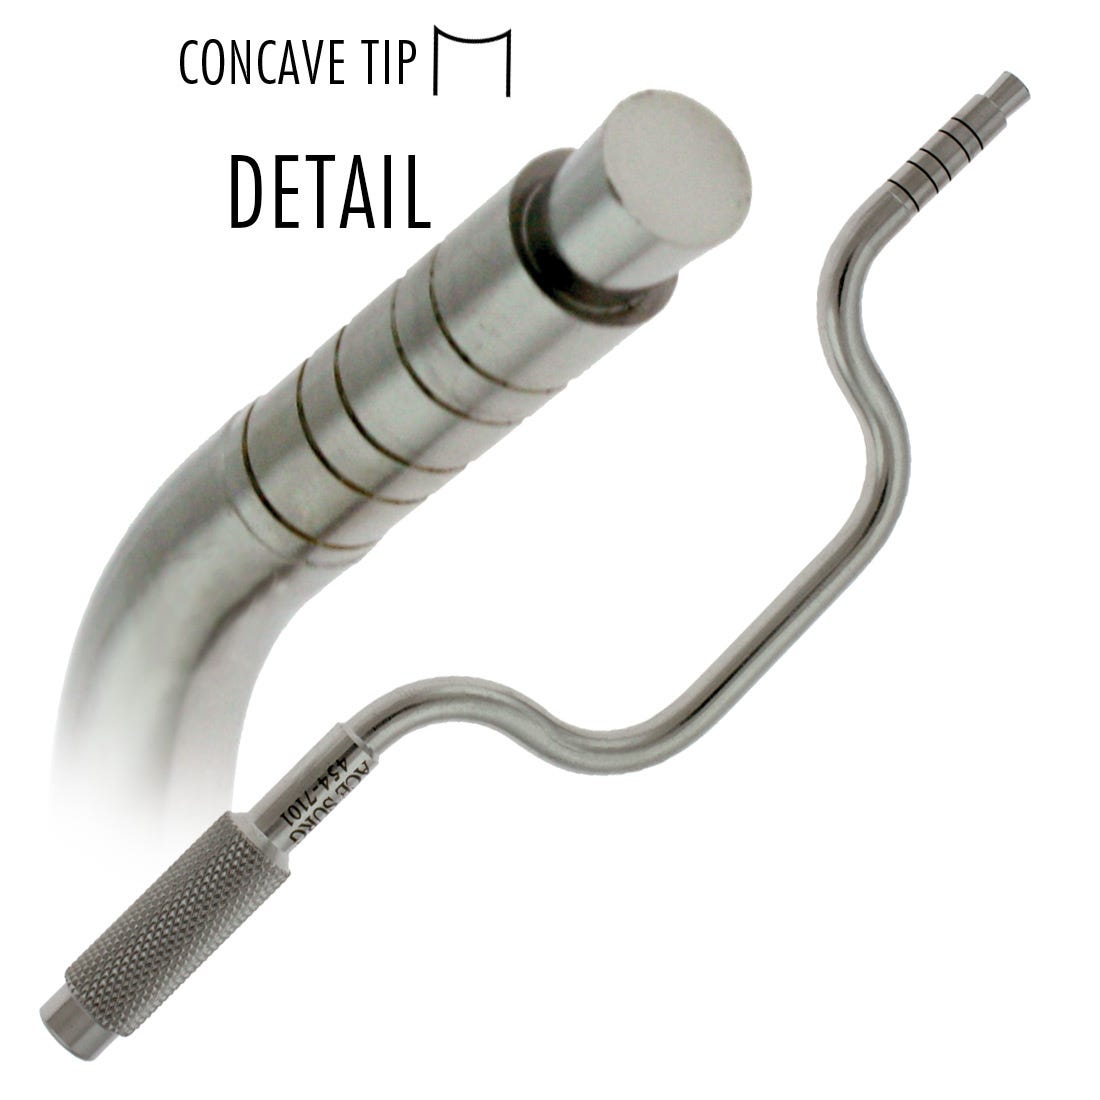 ACE Sinus Lift Offset Osteotome Step 4.35mm/5.0mm